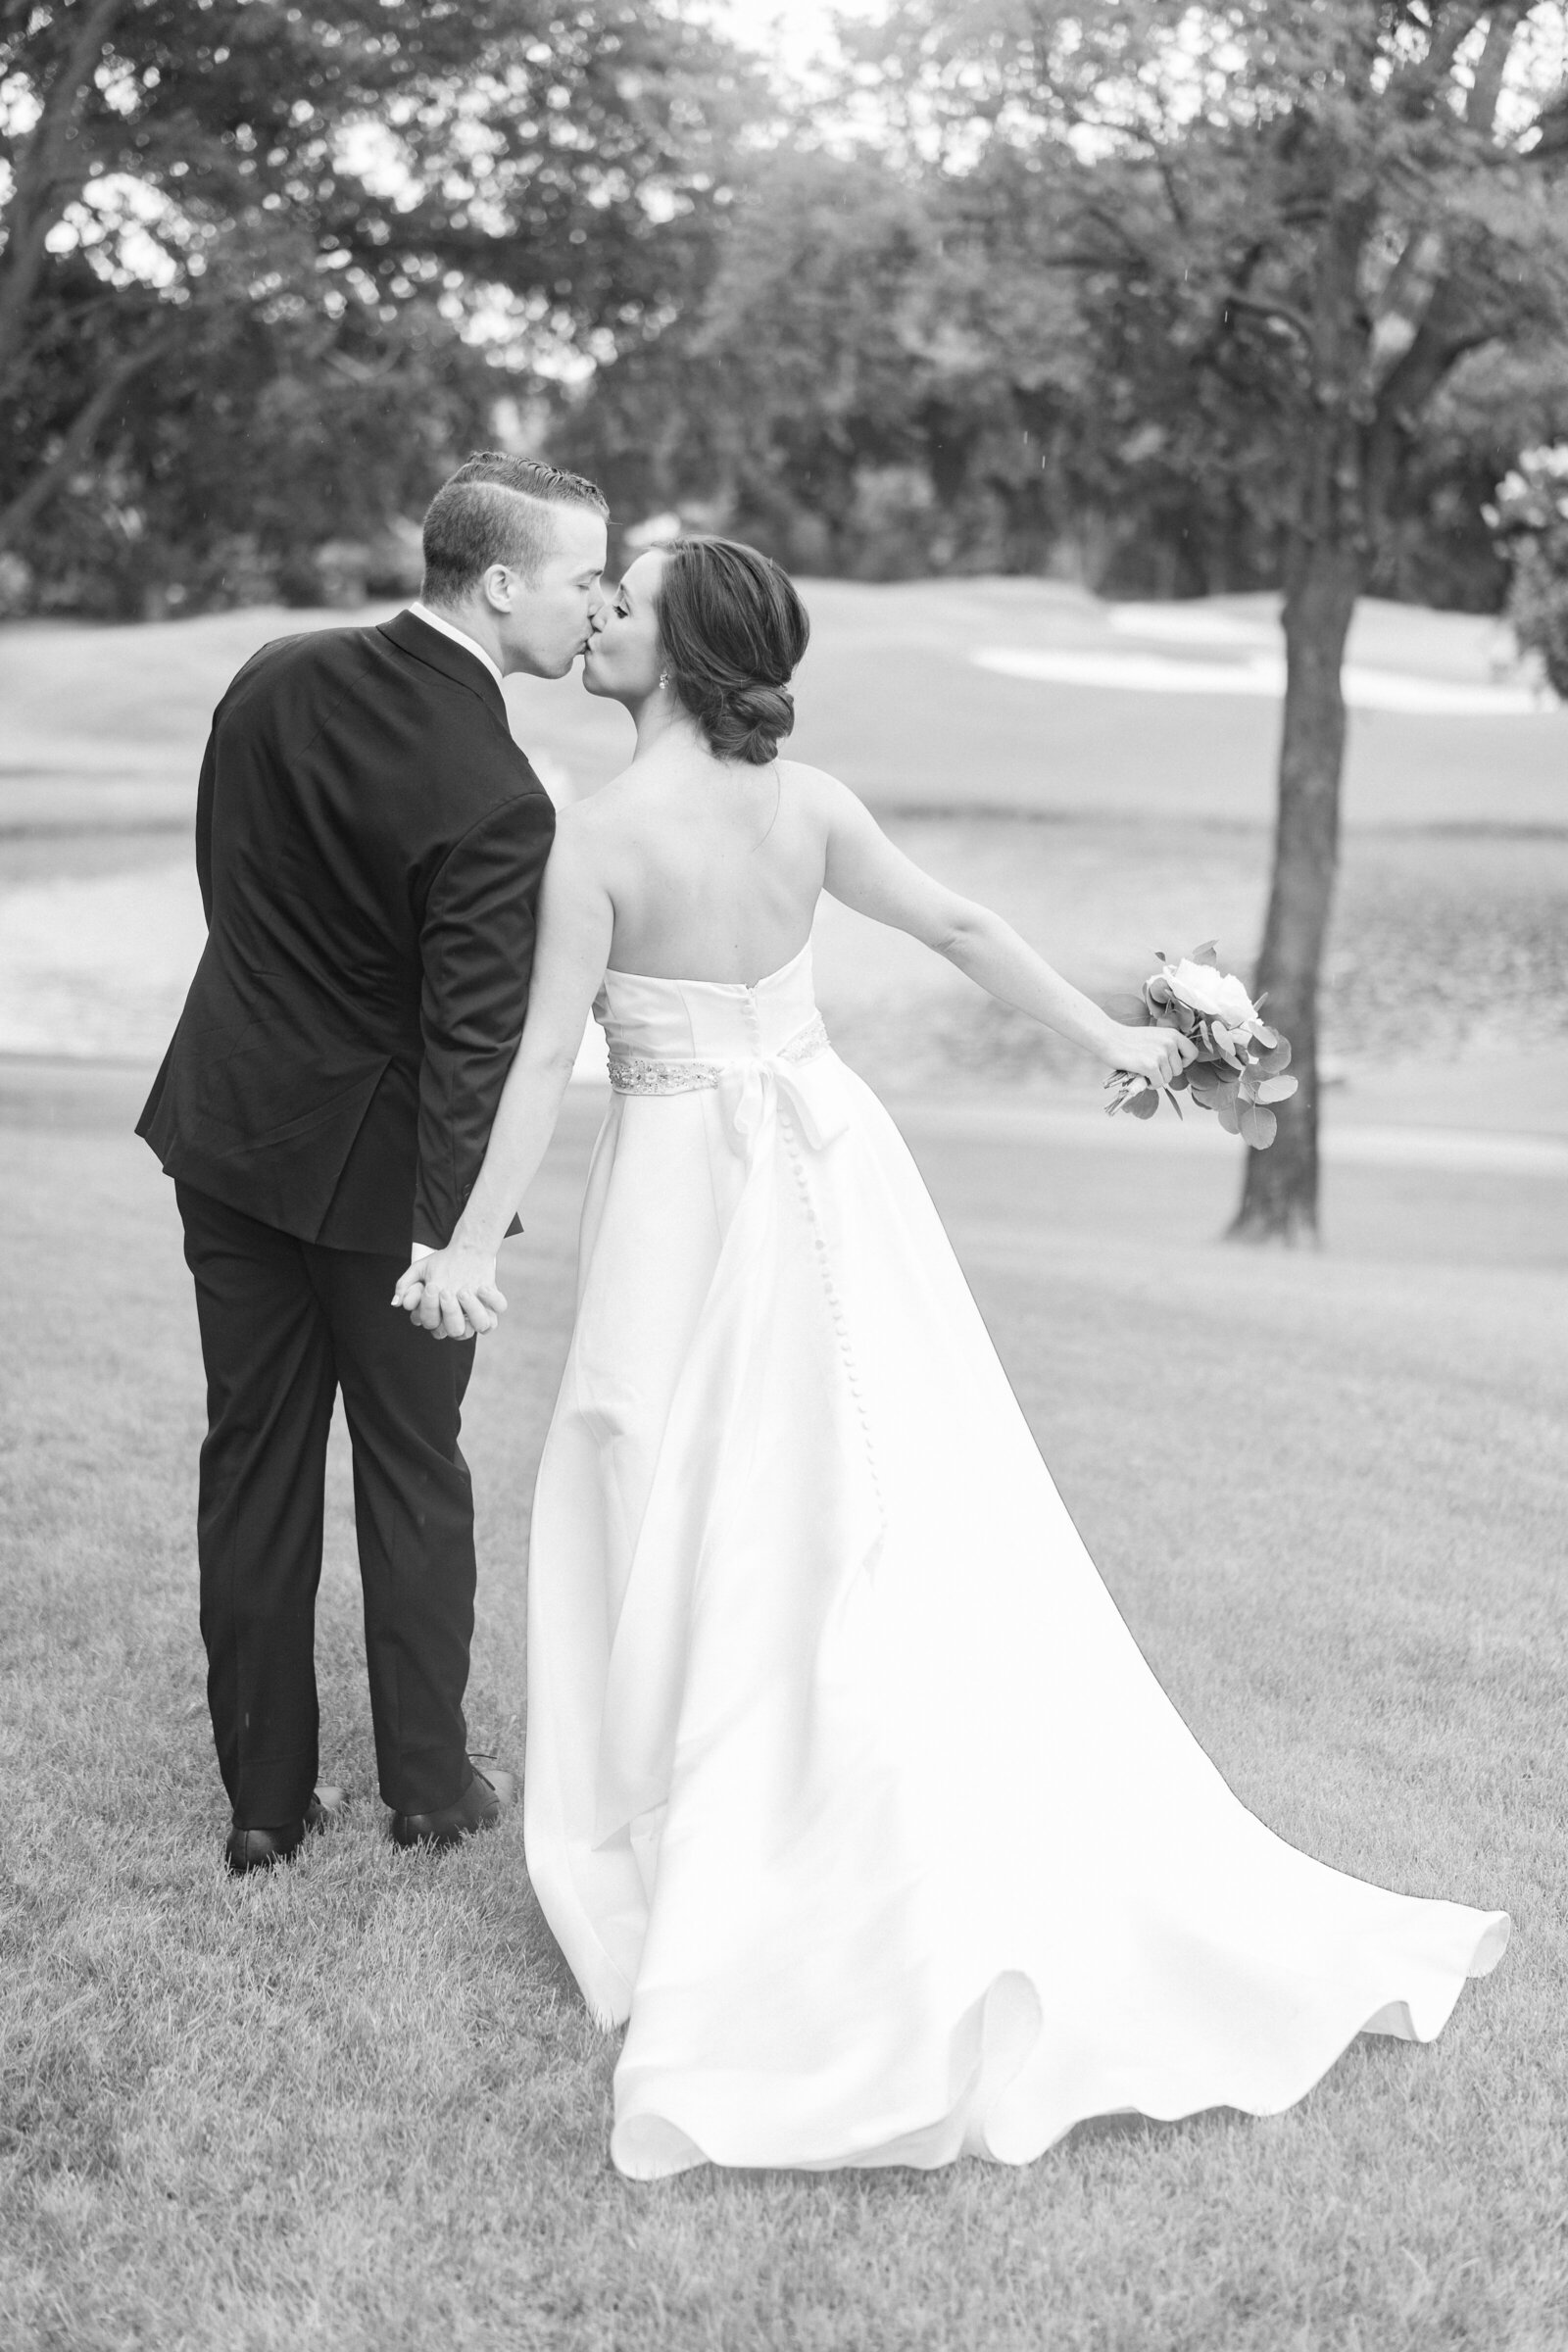 Black and white portrait of a bride and groom in a wedding gown and tuxedo standing on a grass field.